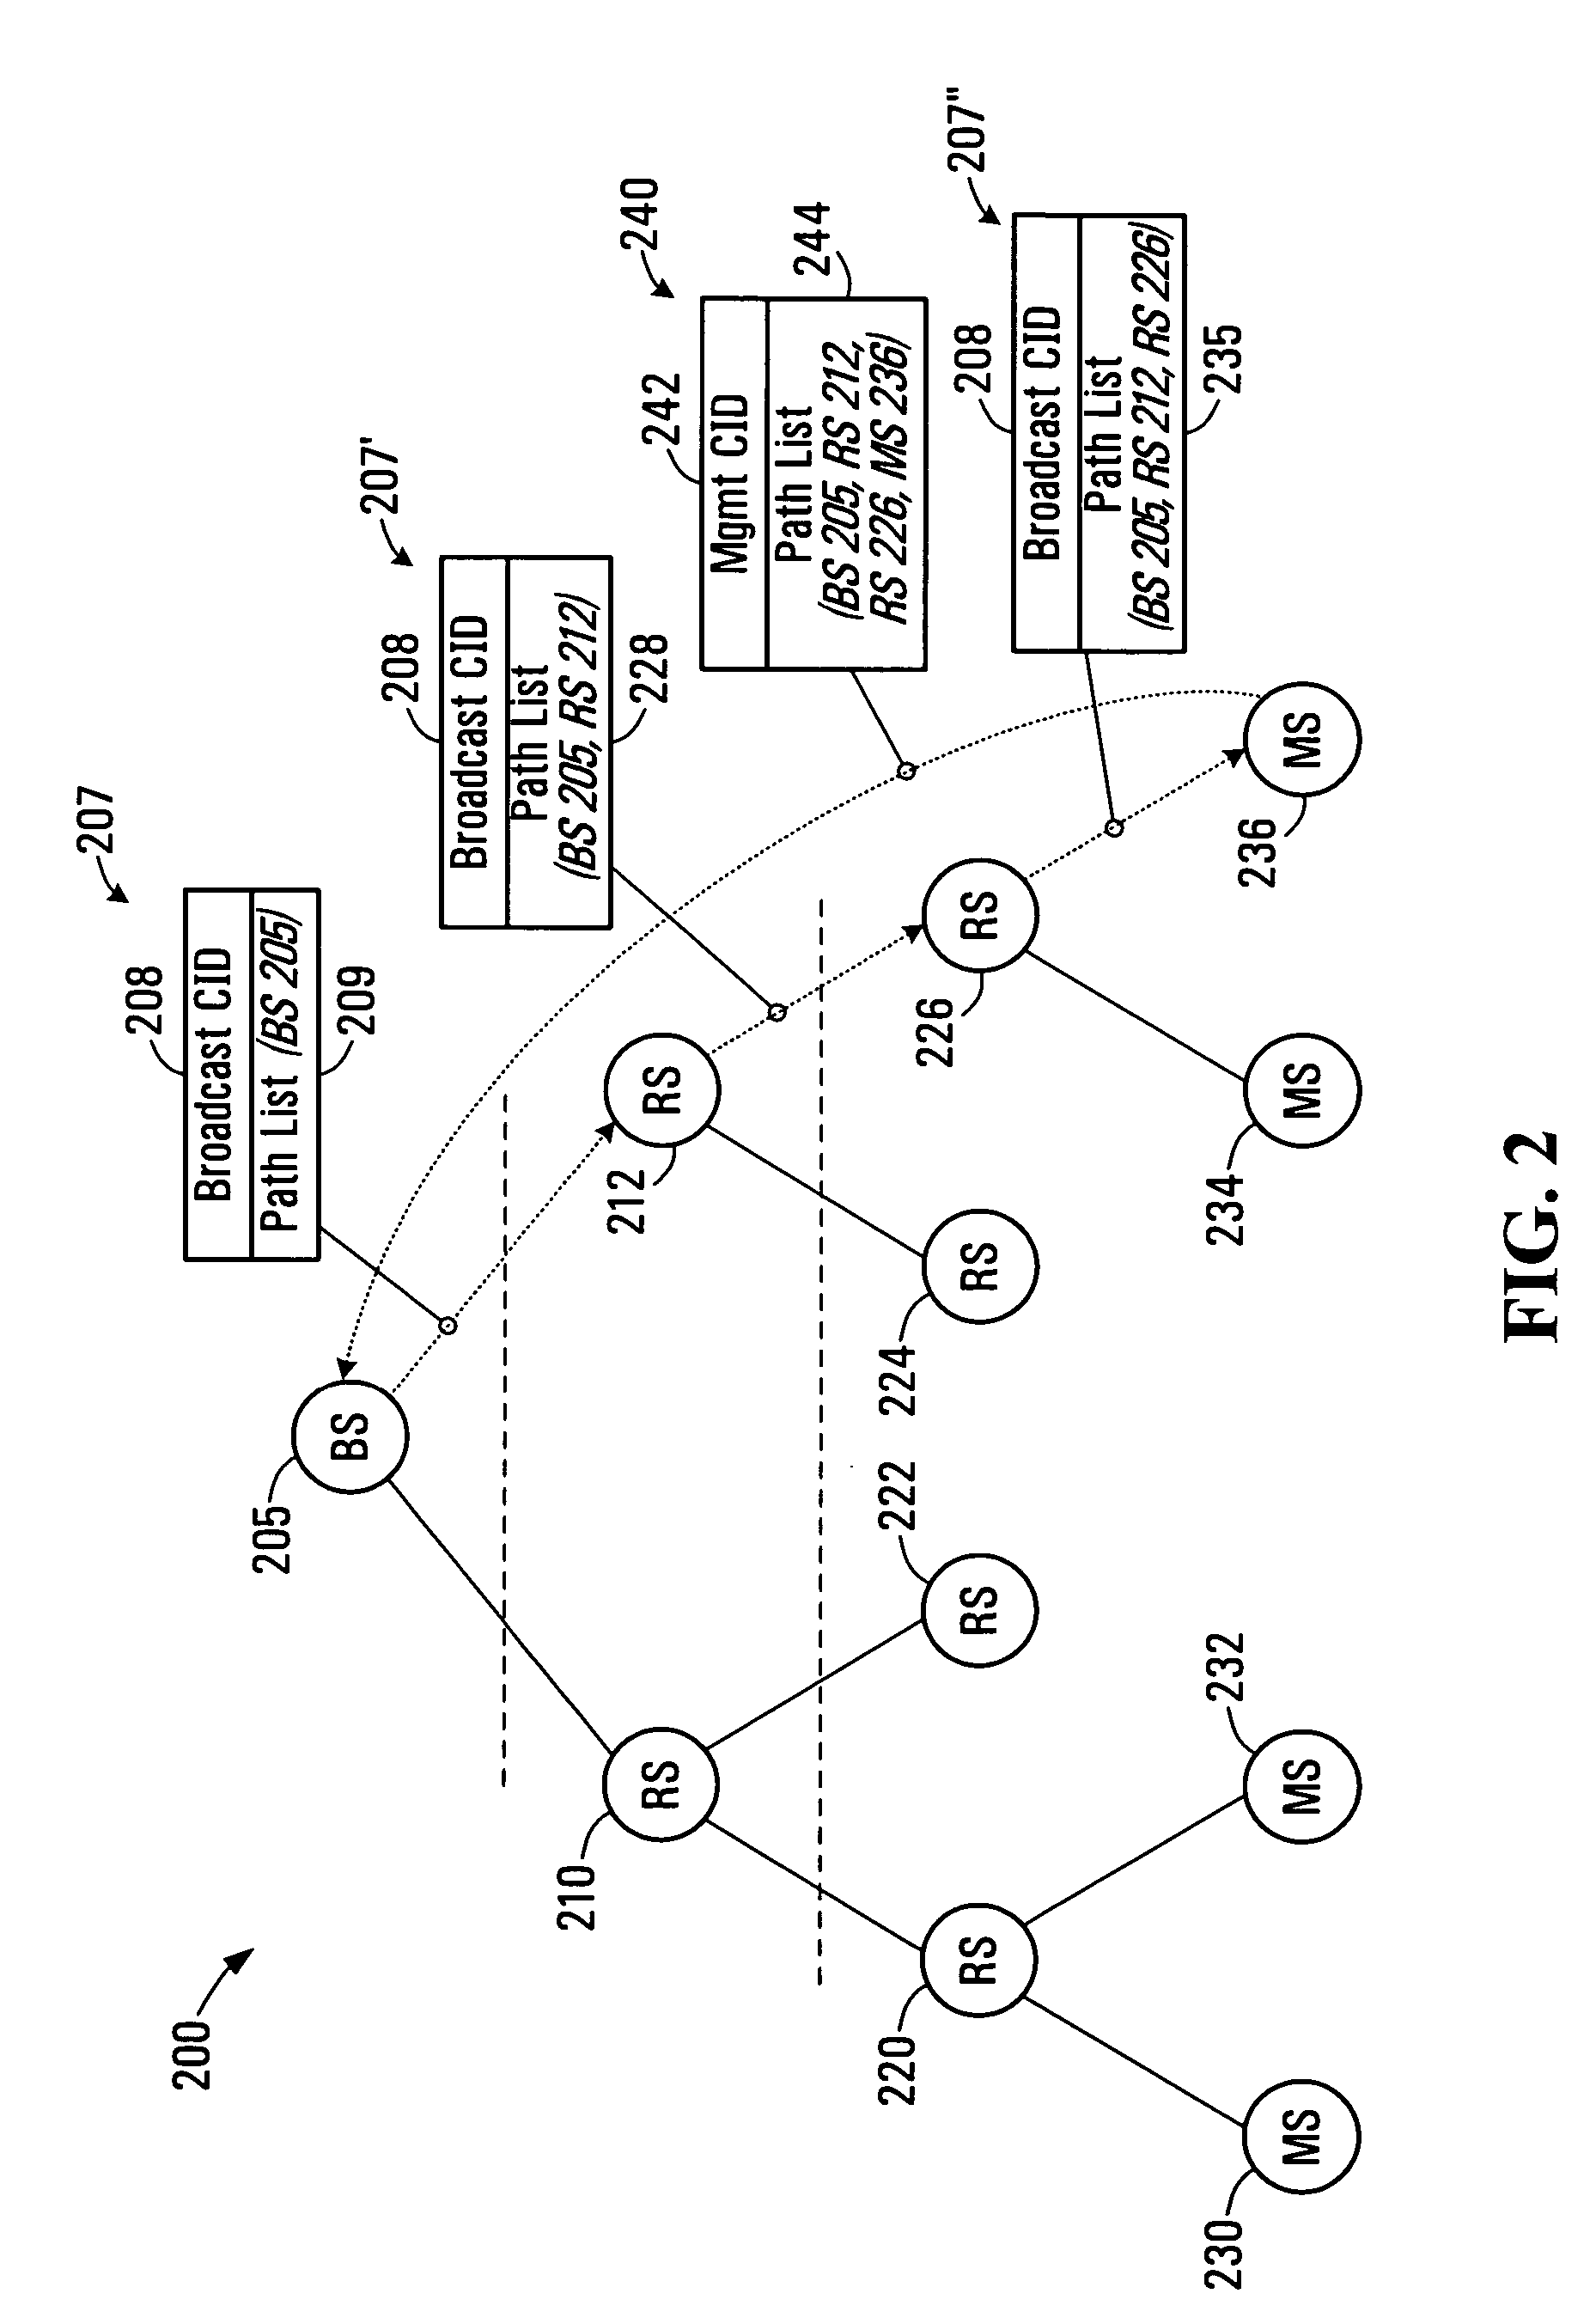 Methods and systems for a wireless routing architecture and protocol